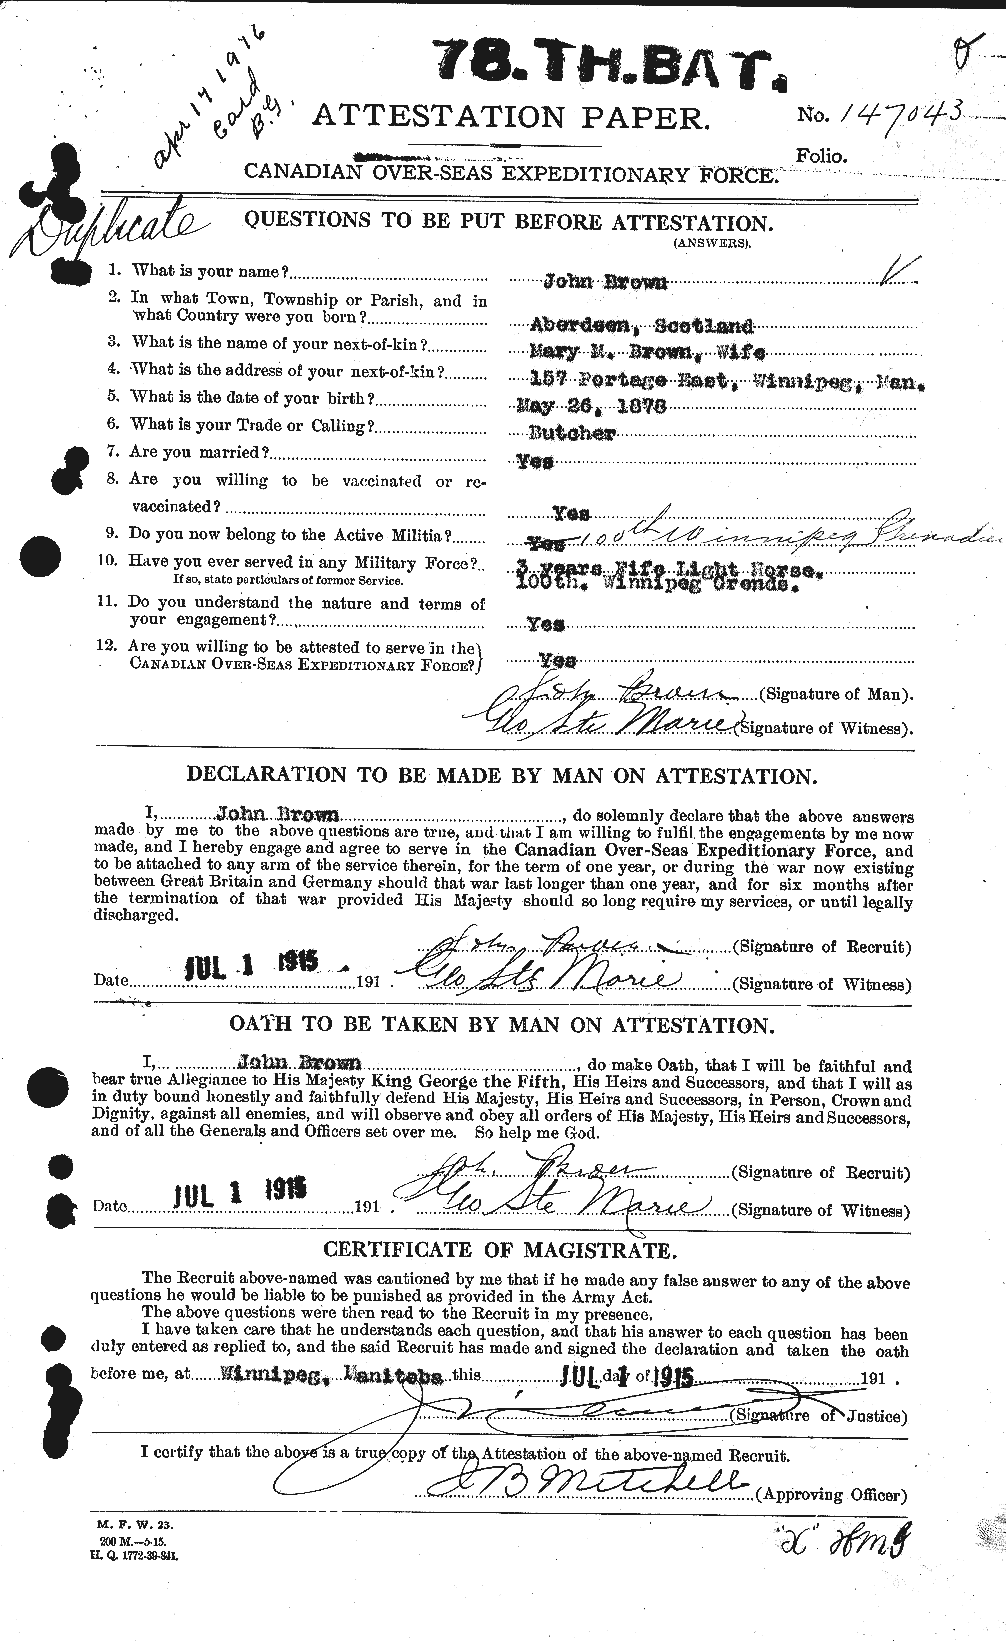 Personnel Records of the First World War - CEF 263919a